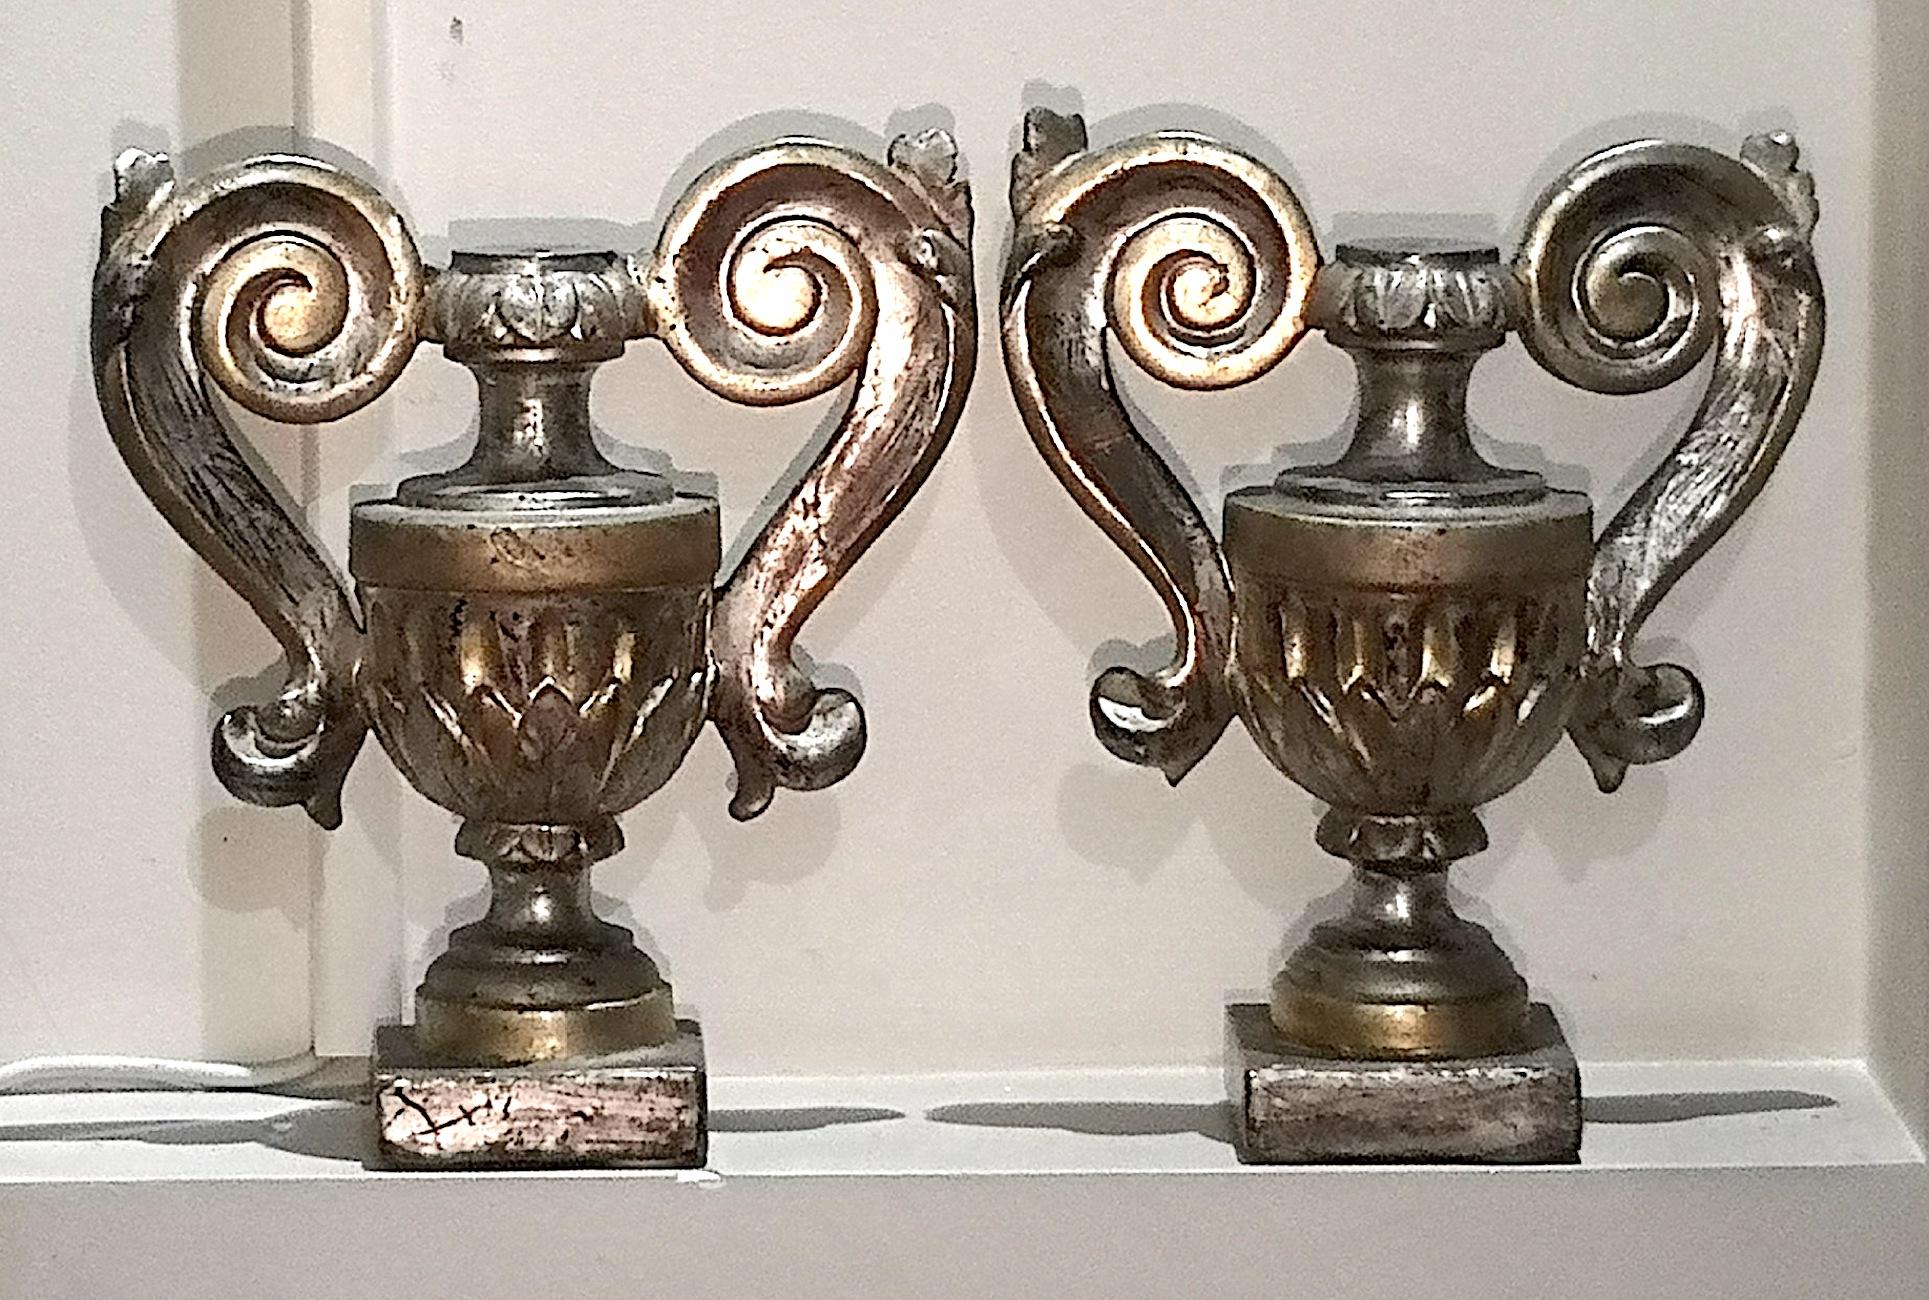 A beautiful pair of carved Italian church altar palm holders in mecca silver leaf from the last quarter of the 18th century and in the Luise XVI manner. Each palm holders measures 13.38 inches high 12 inches wide and 6 inches deep. They are gilded